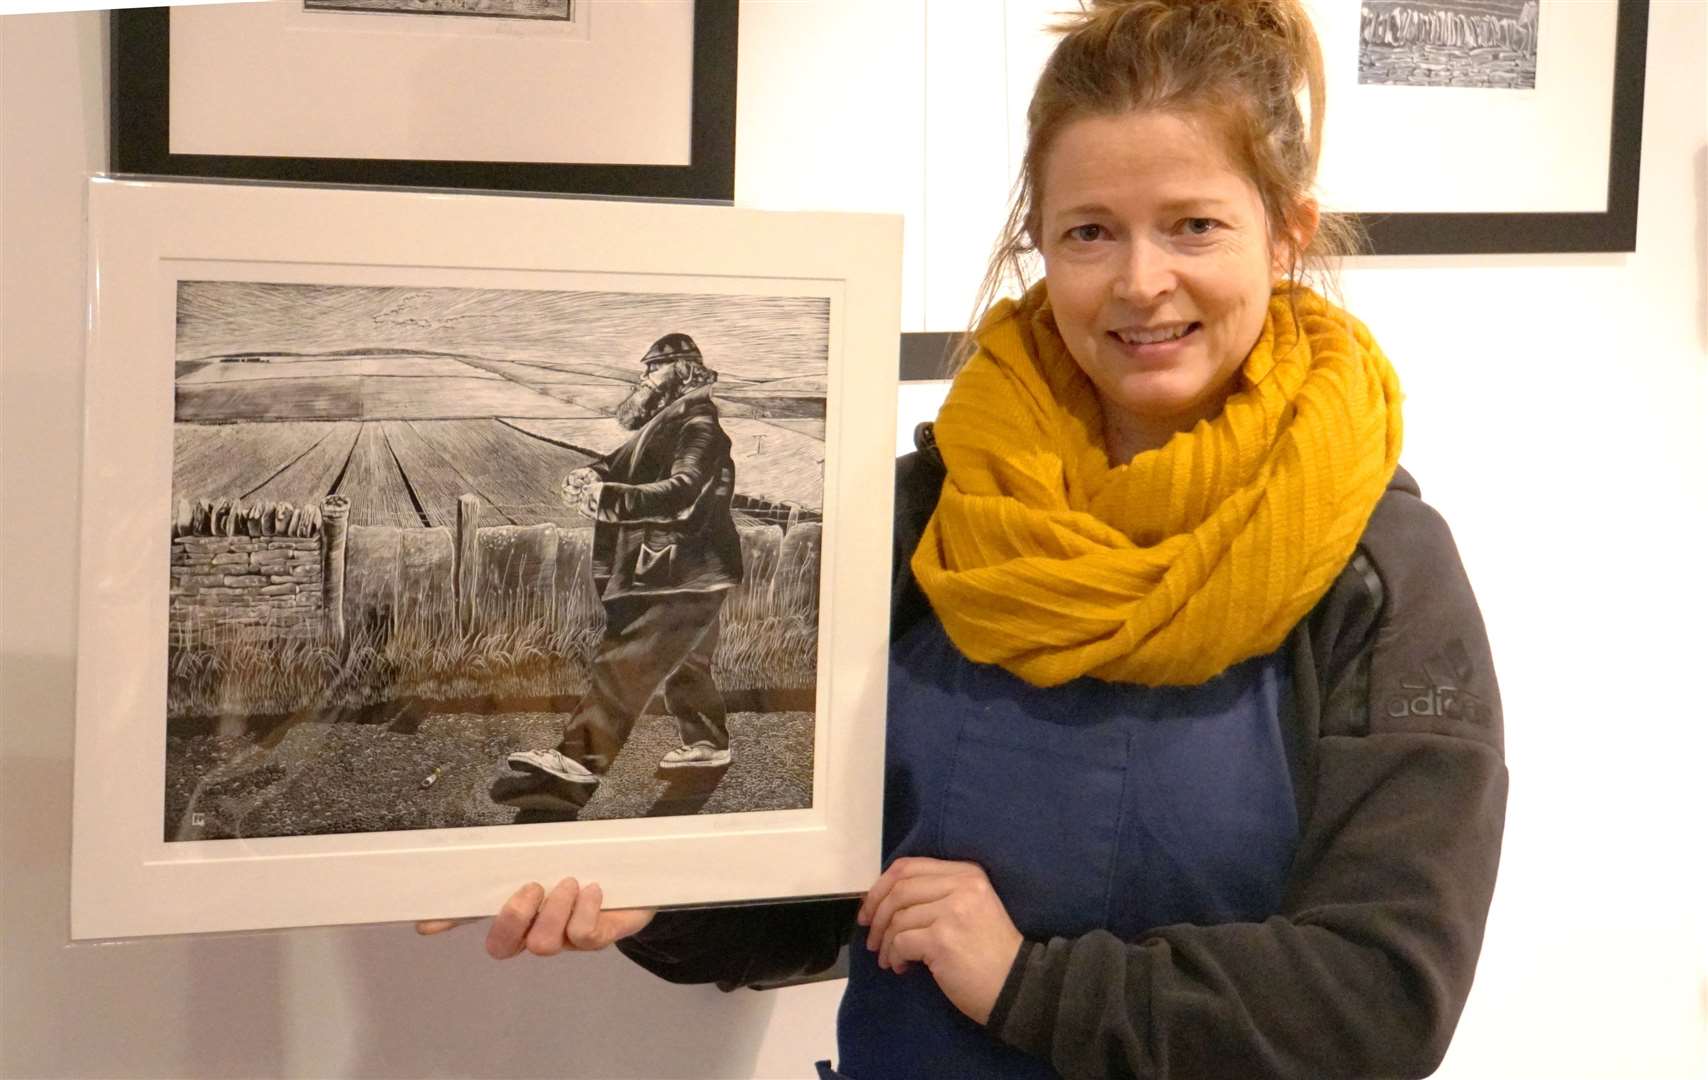 Lindsey shows a recent work portraying late Thurso character "Doupy Dan" currently on show at The Art Gallery in Thurso Library.